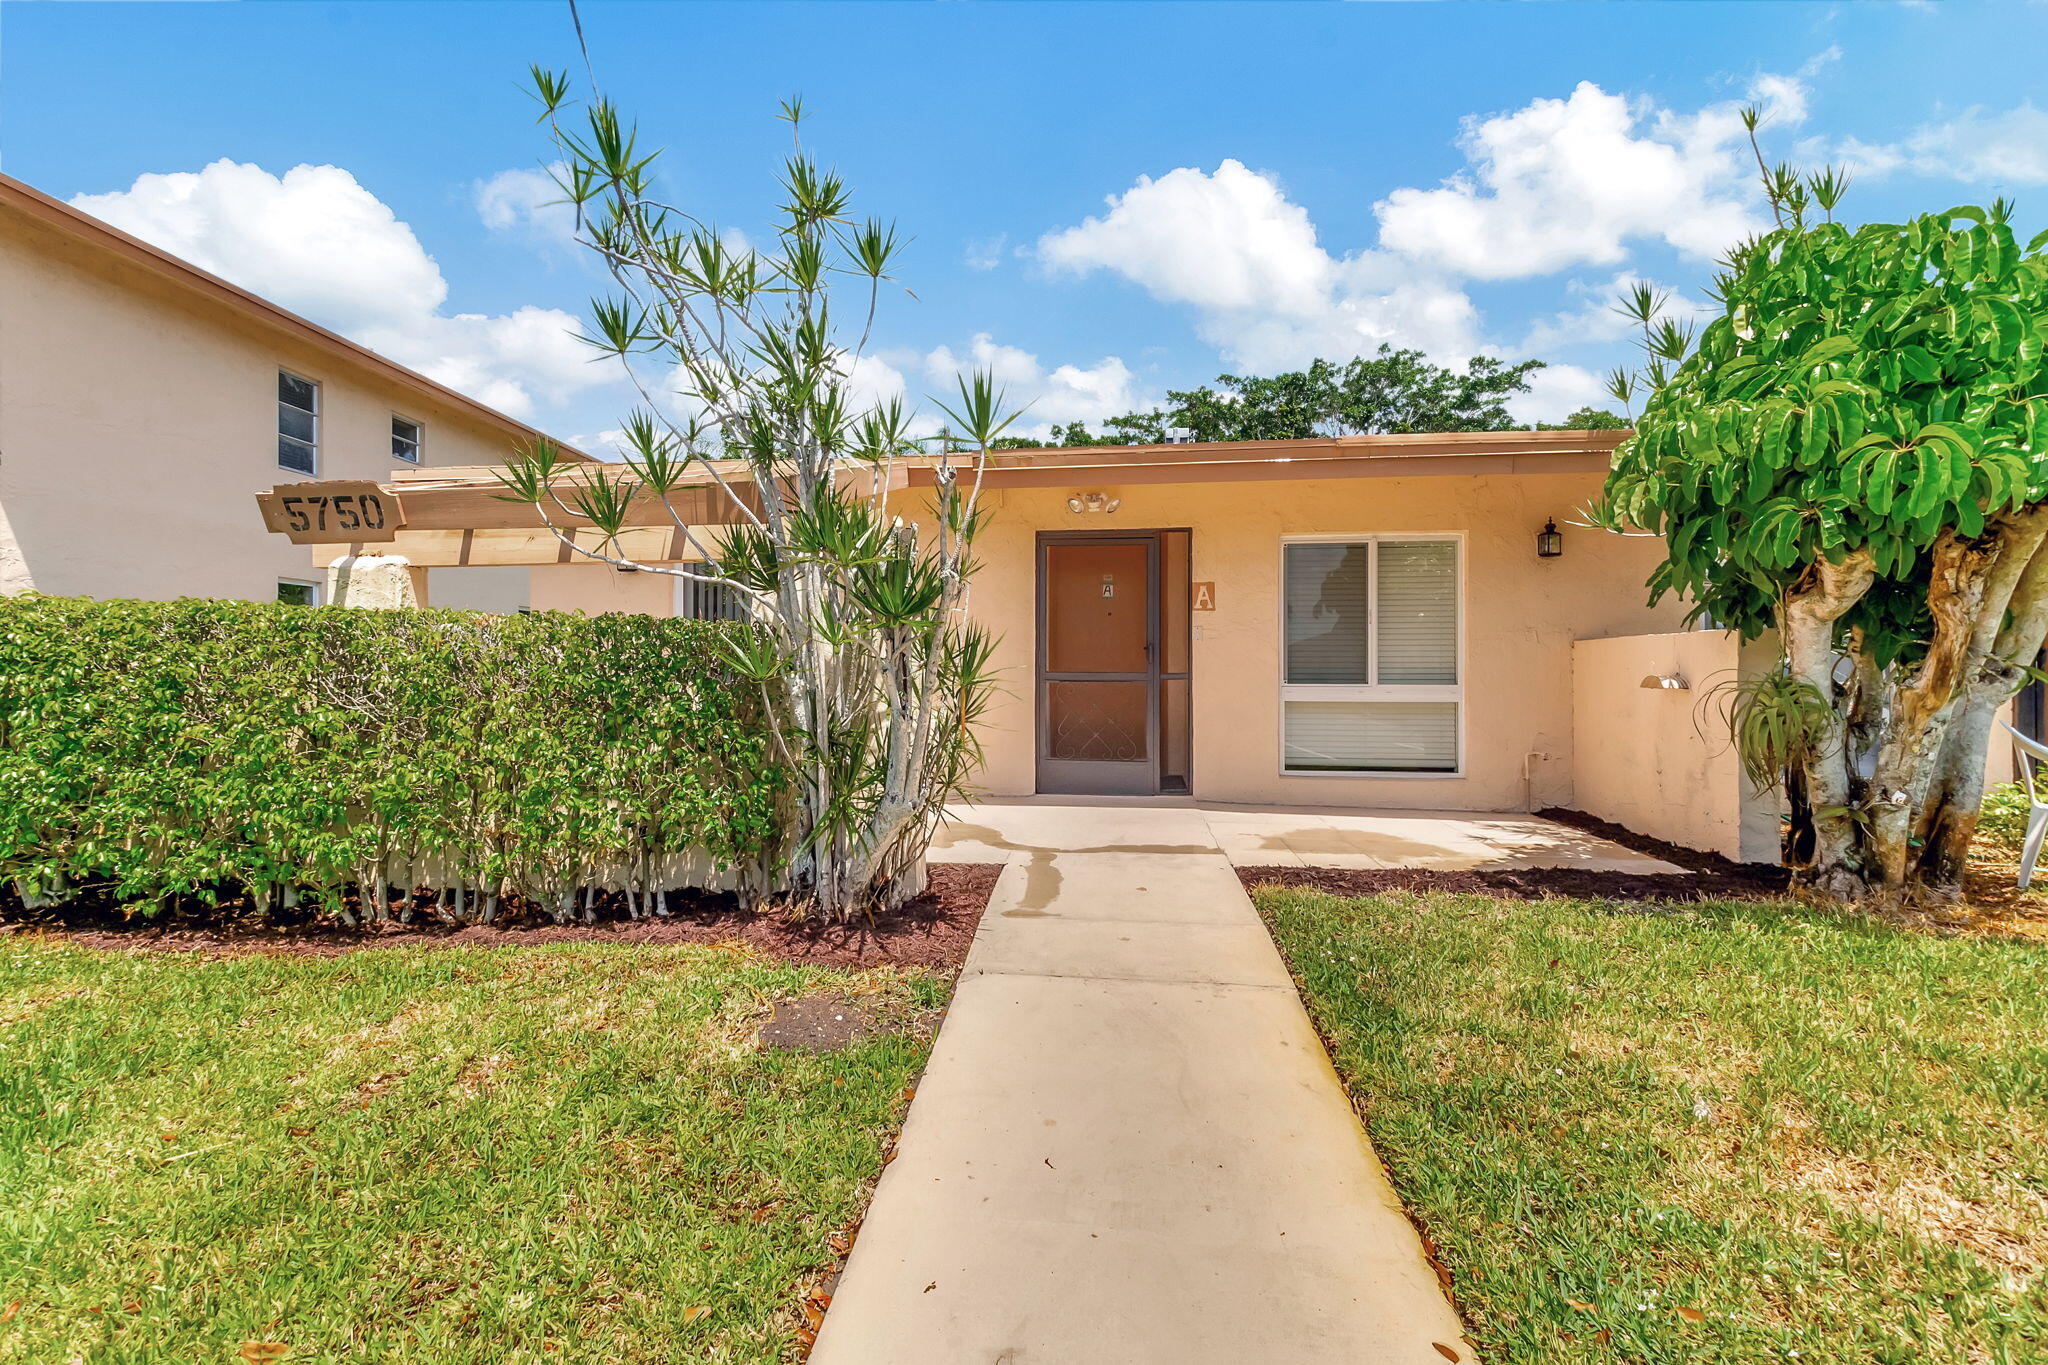 Property for Sale at 5750 Princess Palm Court Ct A, Delray Beach, Palm Beach County, Florida - Bedrooms: 2 
Bathrooms: 2  - $235,000